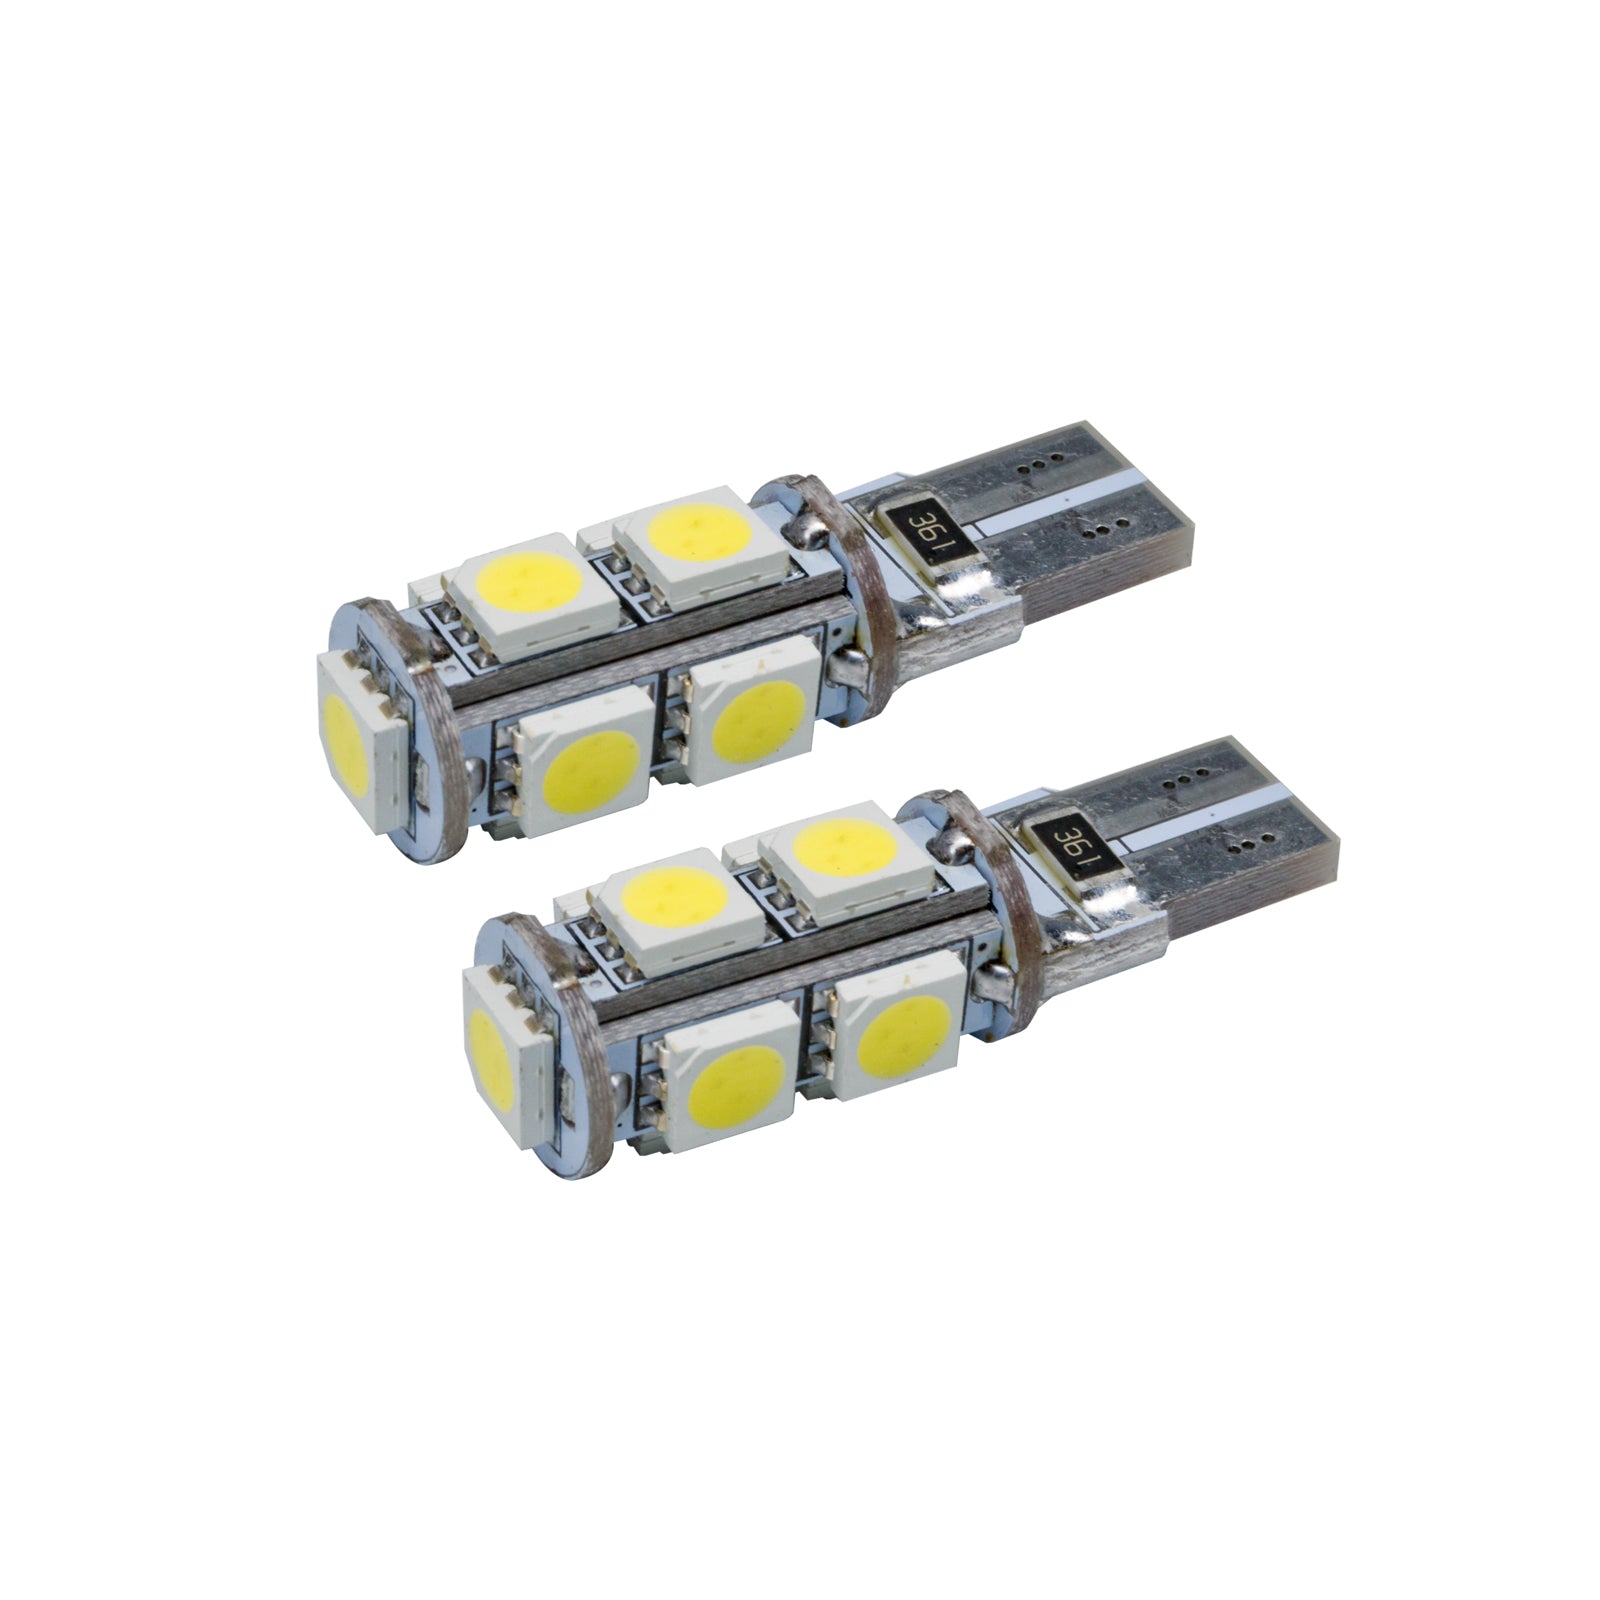 ORACLE Lighting T10 9 LED 3 Chip SMD Bulbs Pair Cool White 4804-001